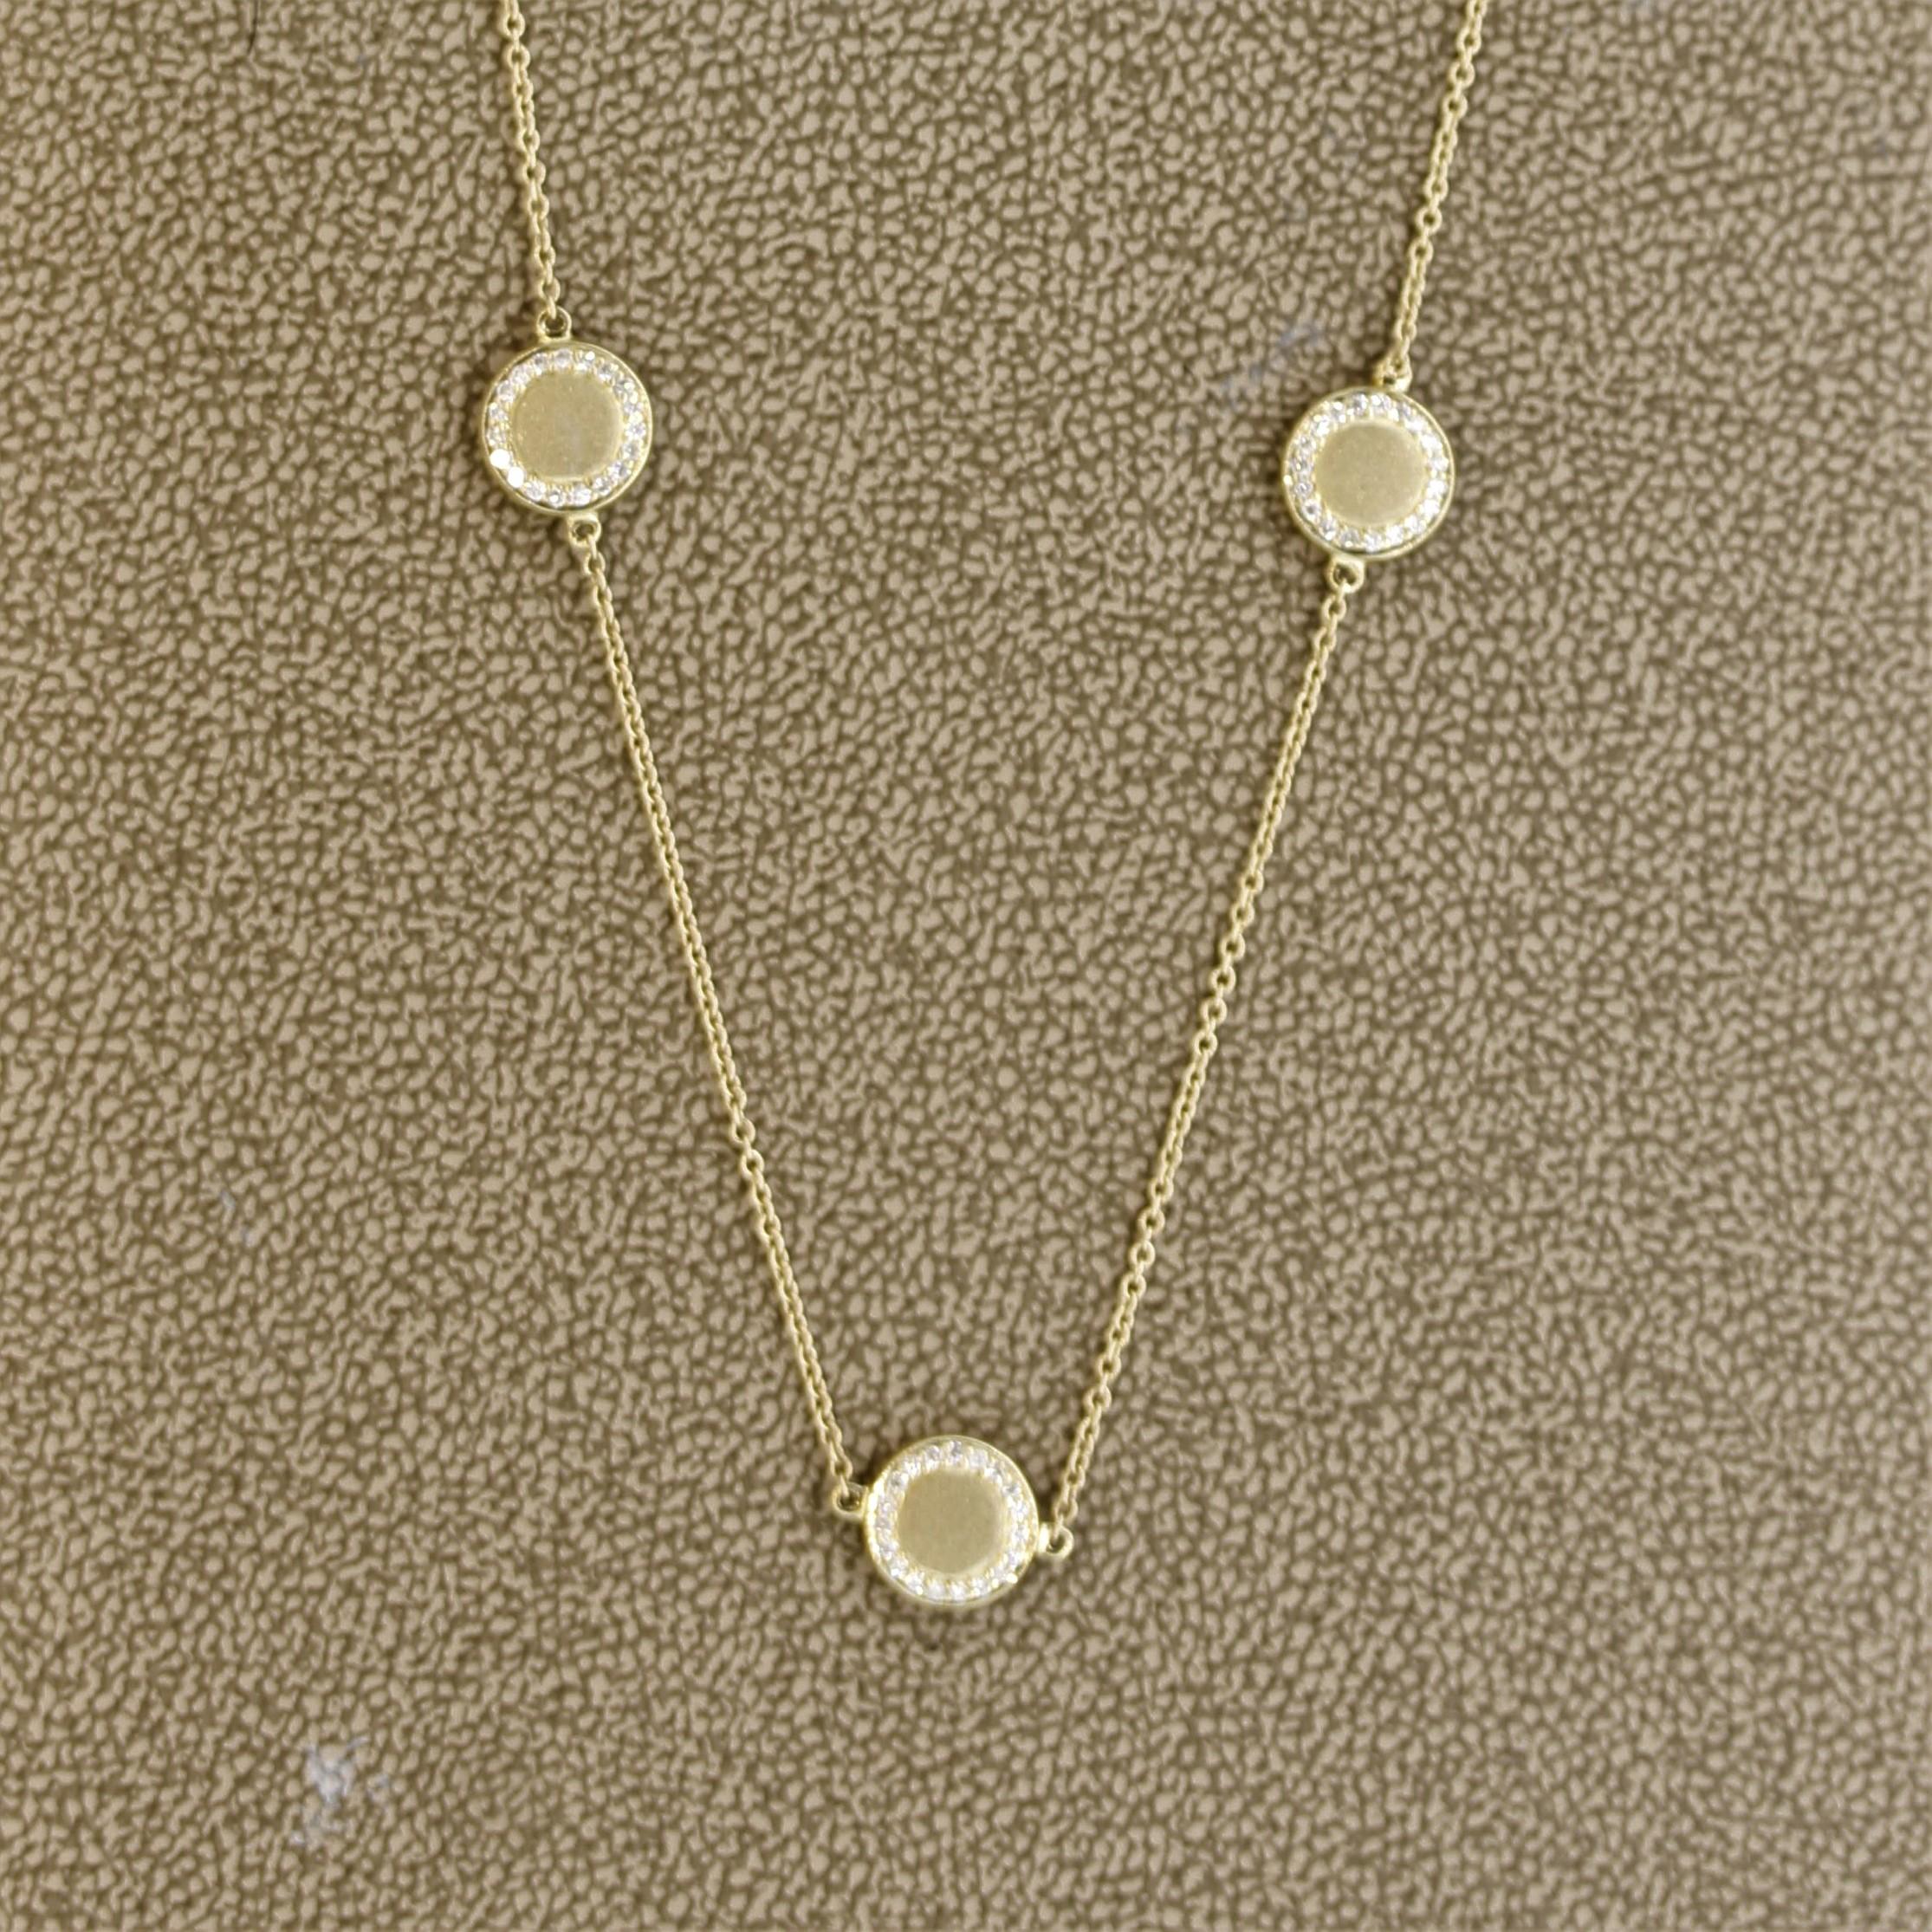 A sweet necklace in the Diamonds by the Yard style. It features 10 round gold medallions which are set with round brilliant cut diamonds, a total of 1.61 carats. Made in 14k yellow gold and measuring 32 inches long, this stylish necklace will